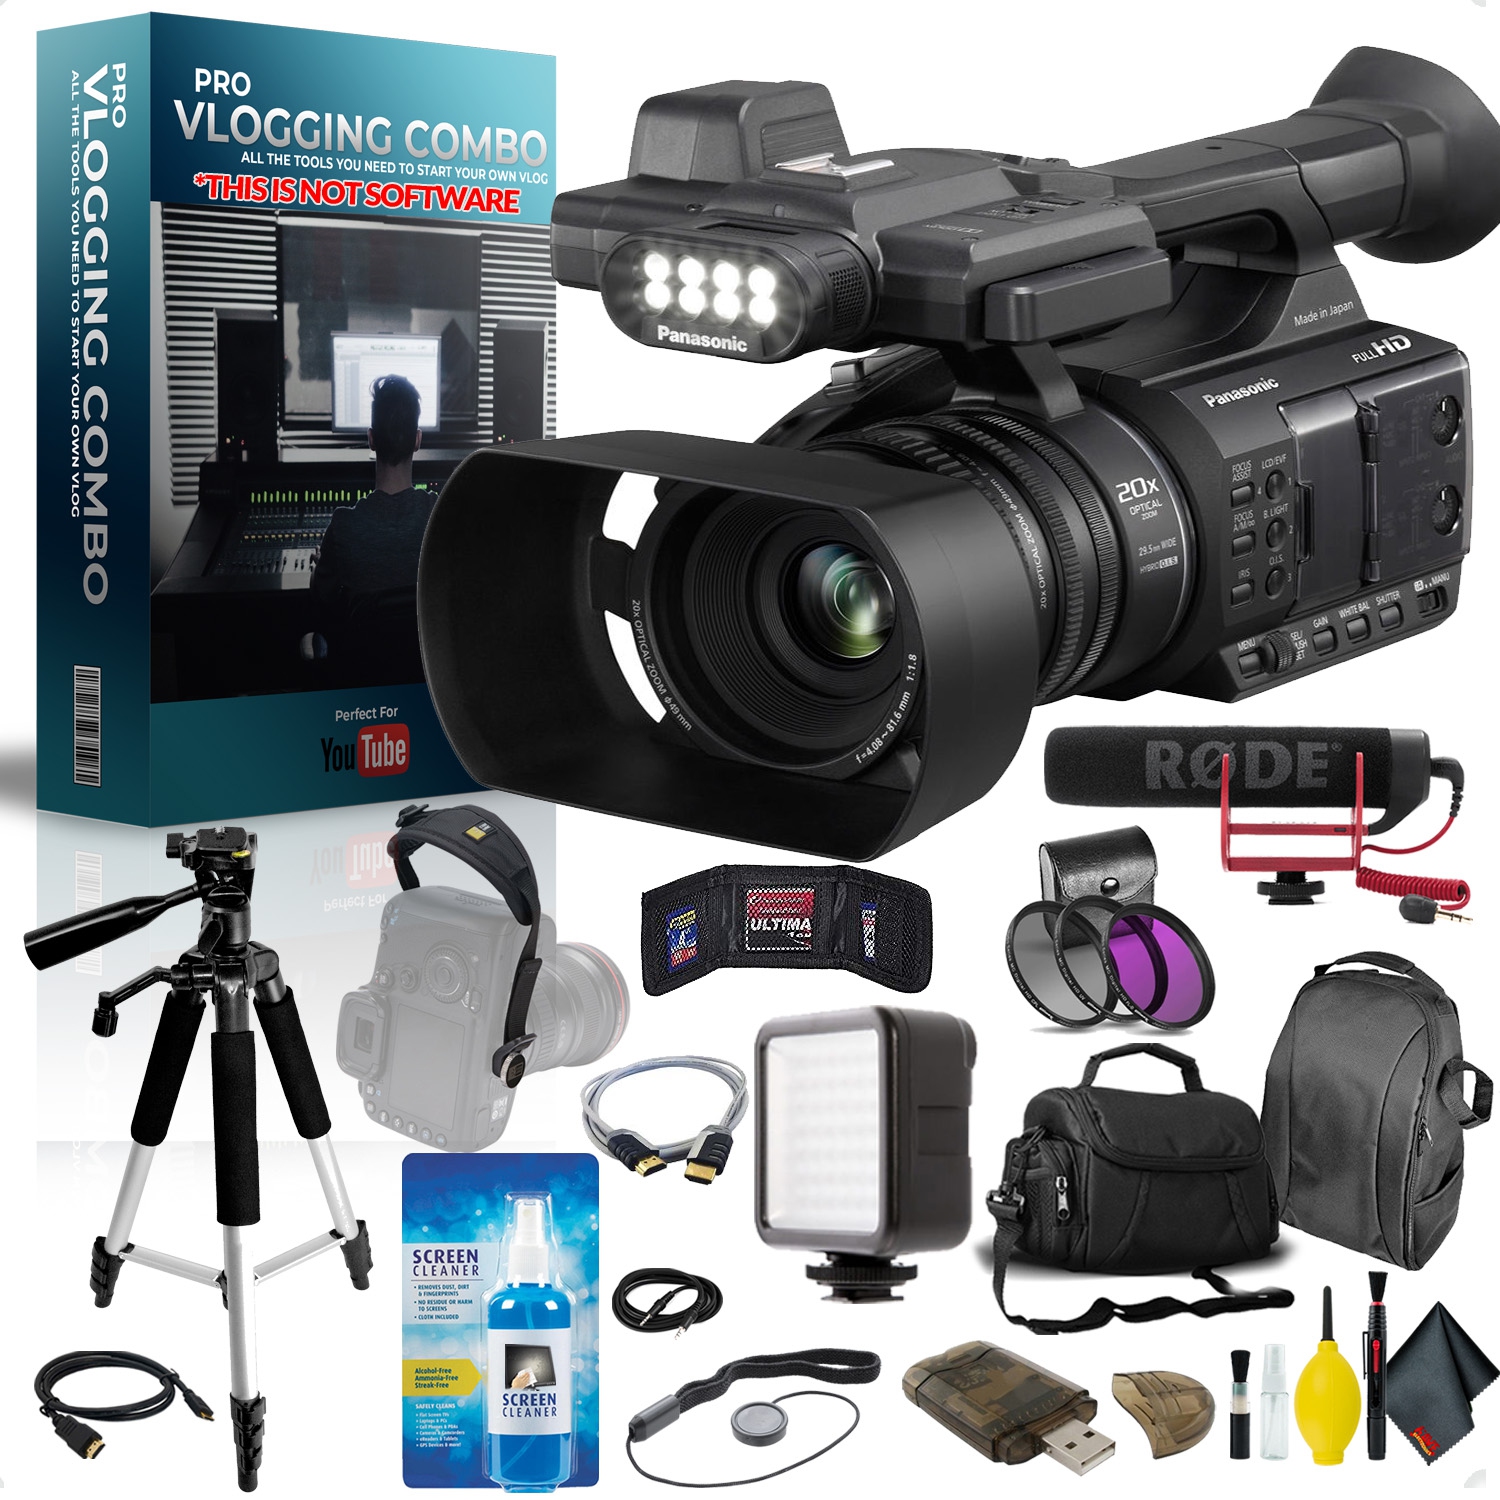 Panasonic AG-AC30 Full HD Camcorder with Touch Panel LCD Viewscreen and  Built-in LED Light Pro Vlogger Combo